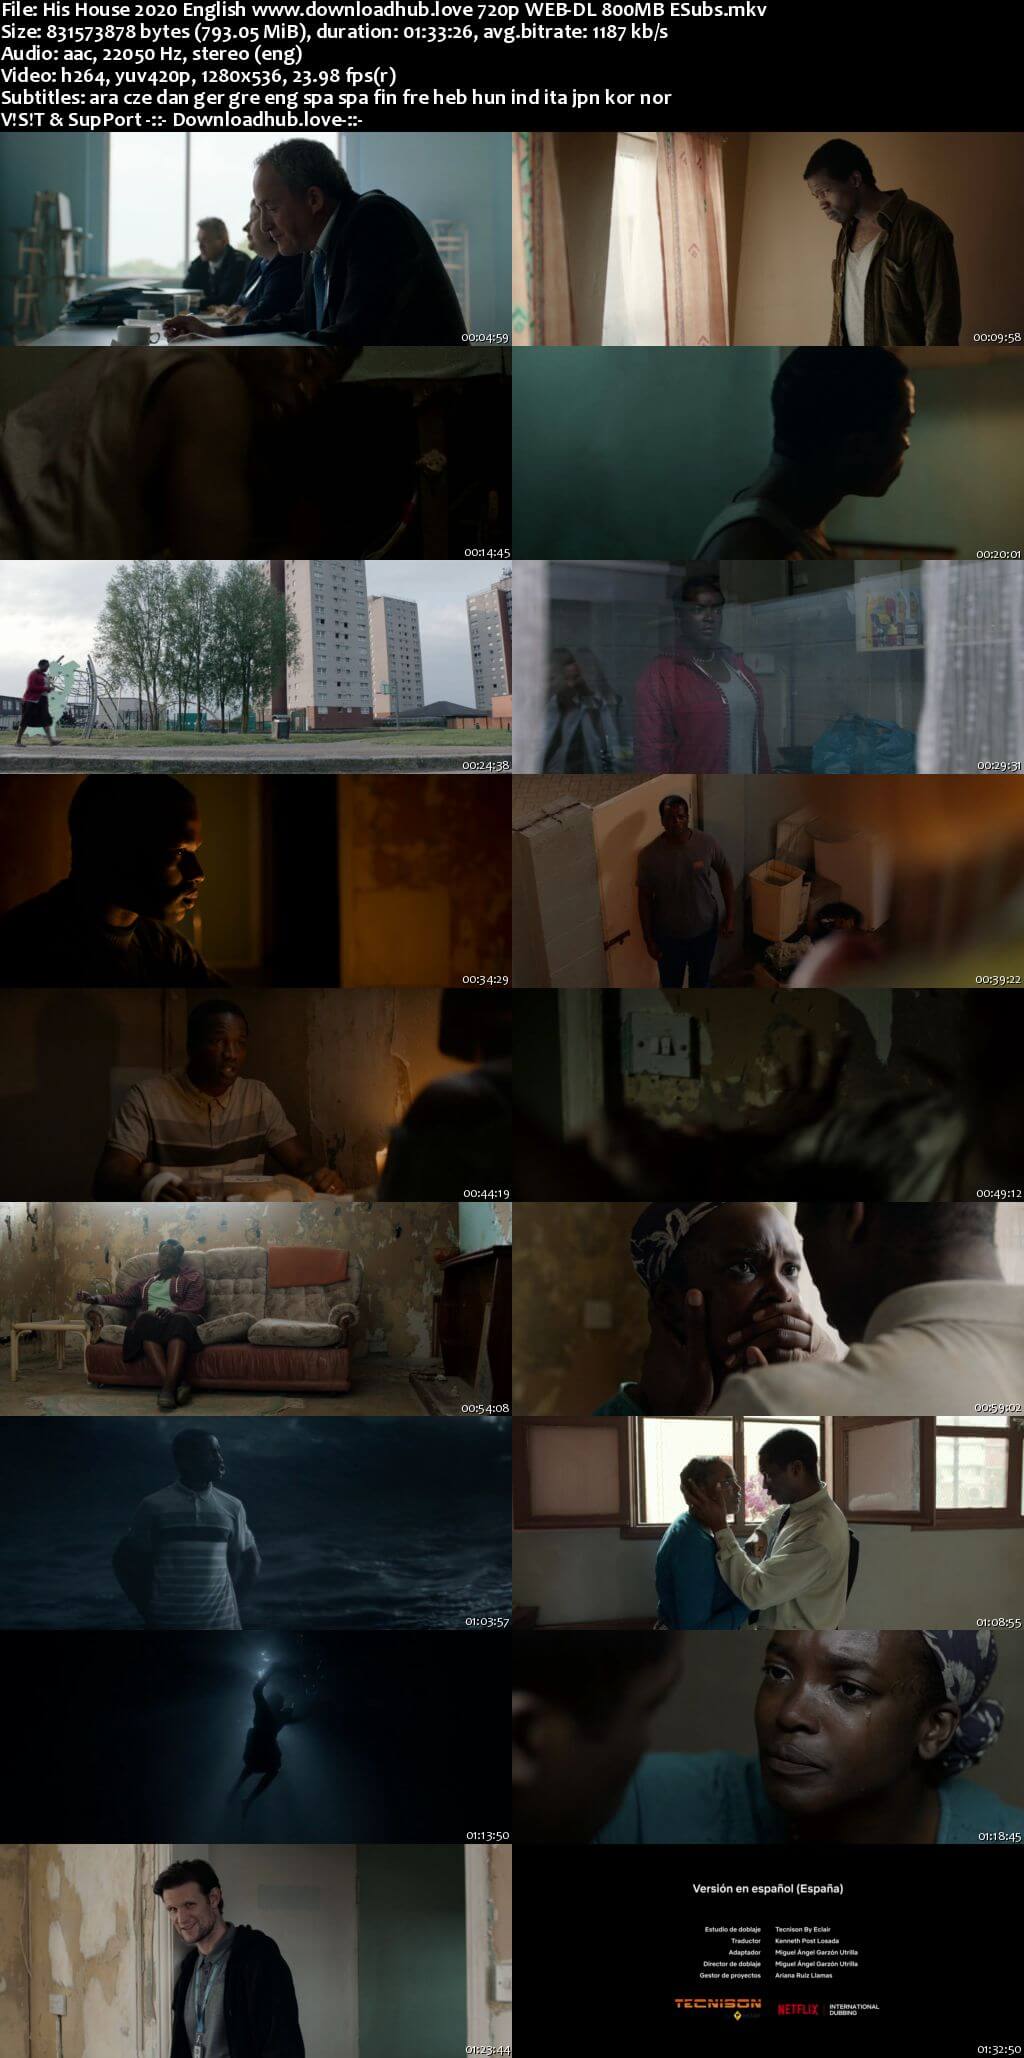 His House 2020 English 720p Web-DL 800MB MSubs